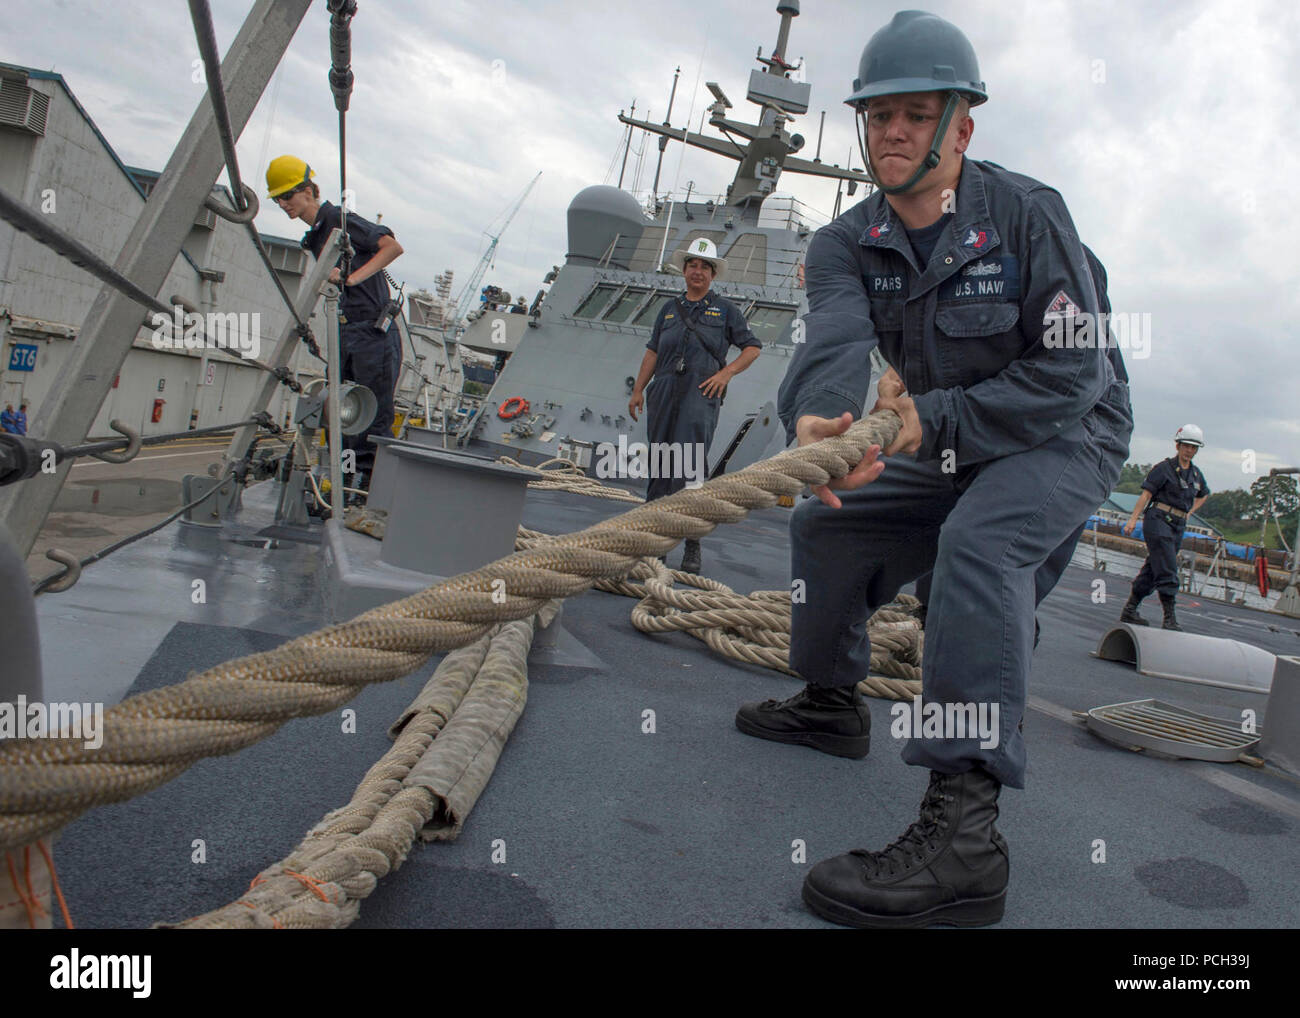 SEMBAWANG, Singapore (Feb. 19, 2015) Culinary Specialist 1st Class Robert Parks, from Fostoria, Ohio, heaves a mooring line on the forecastle of the littoral combat ship USS Fort Worth (LCS 3) during a sea and anchor detail.  Fort Worth is on a 16-month rotational deployment in support of the Asia-Pacific Rebalance, Stock Photo